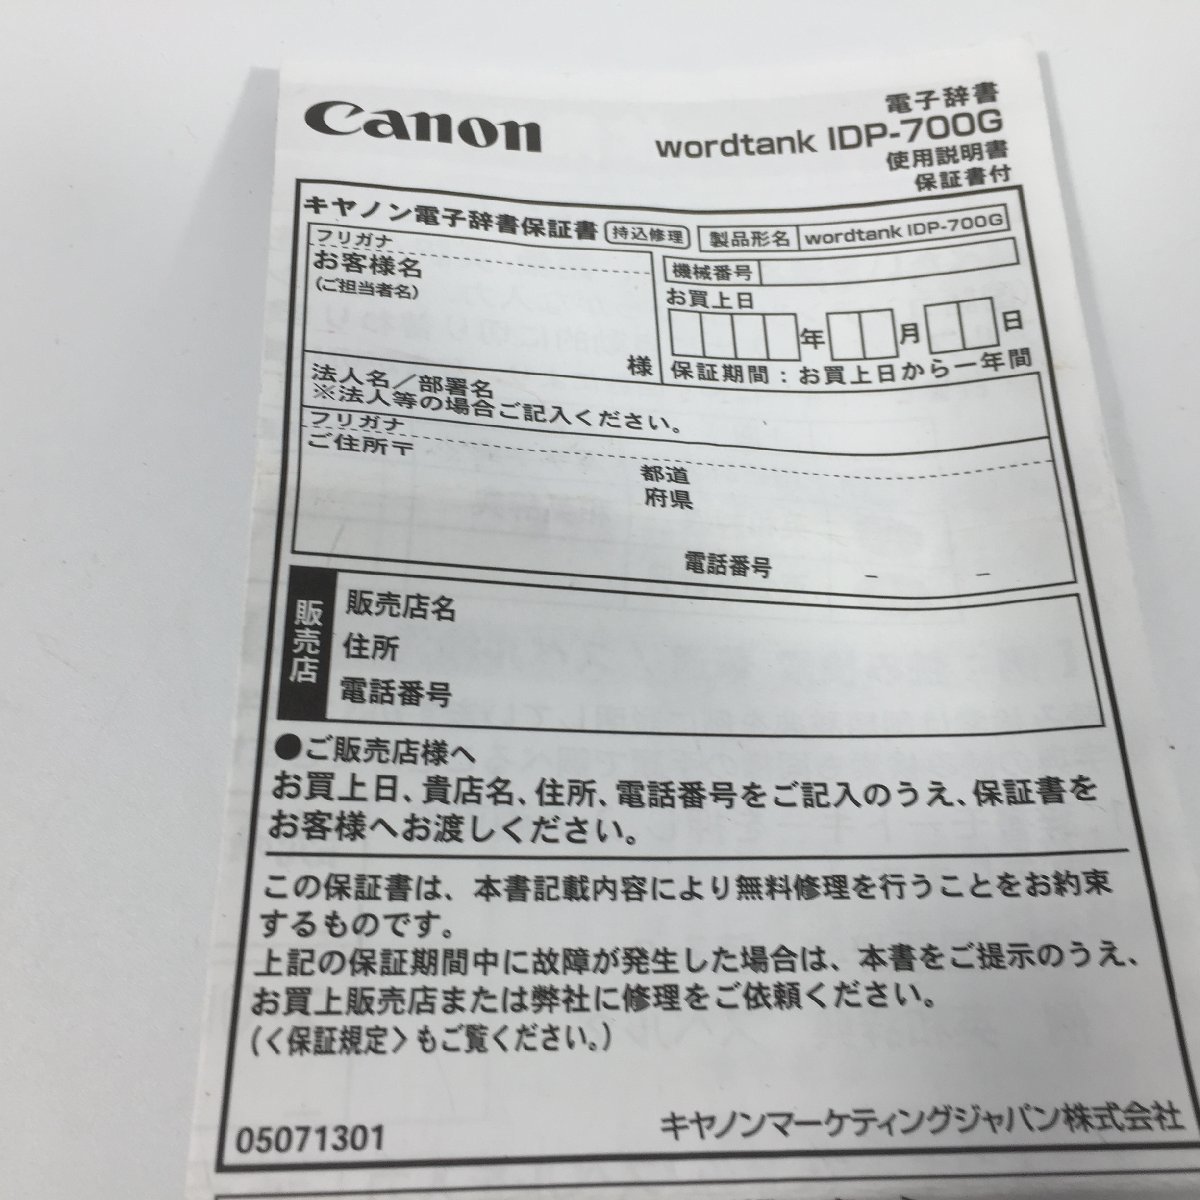 Canon Canon computerized dictionary IDP-700G electrification check settled secondhand goods TH2.023